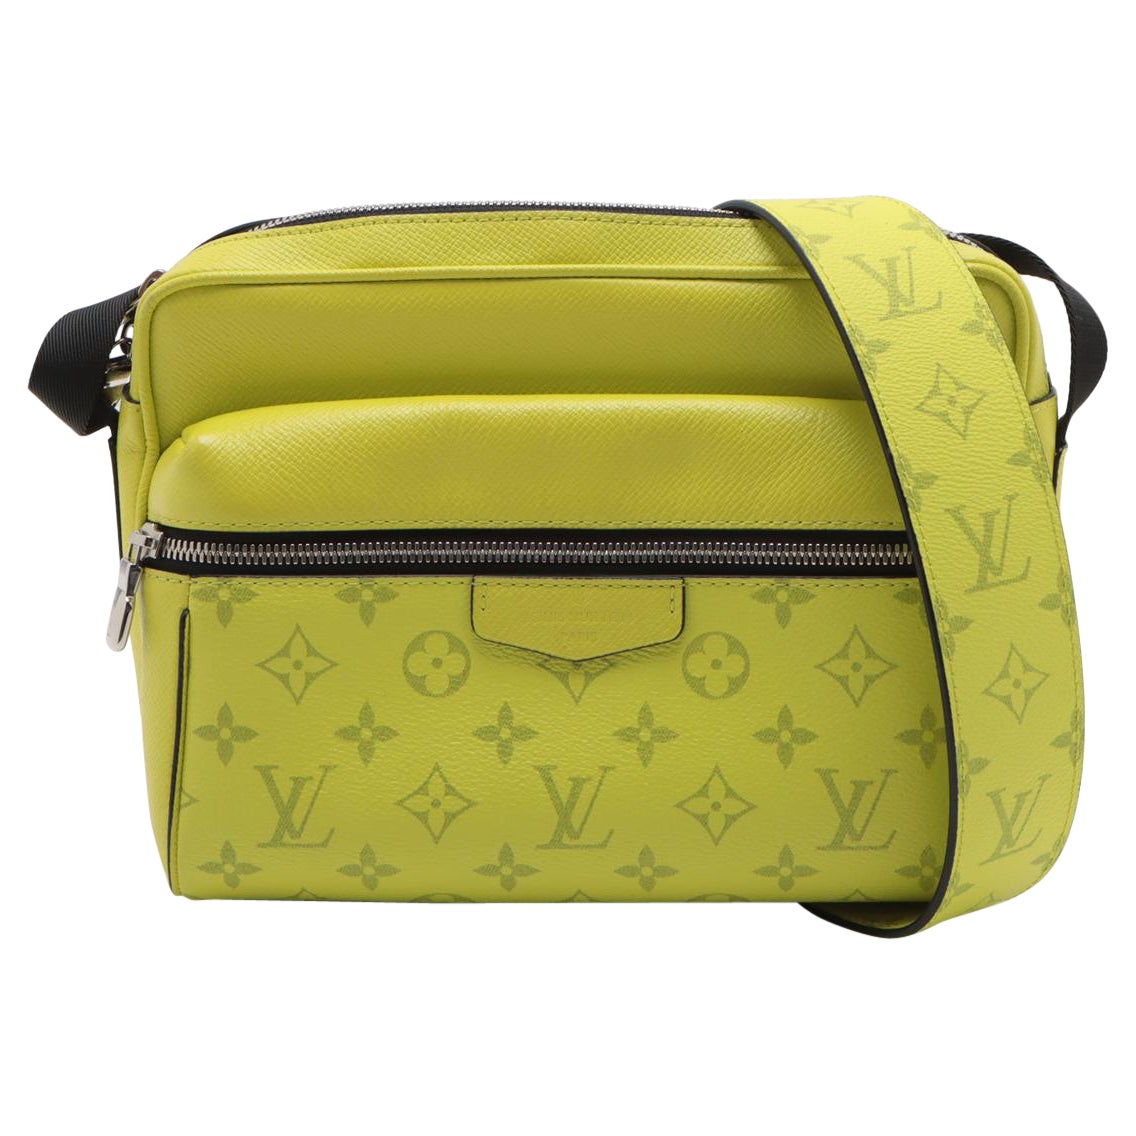 Where can I buy Louis Vuitton goods?